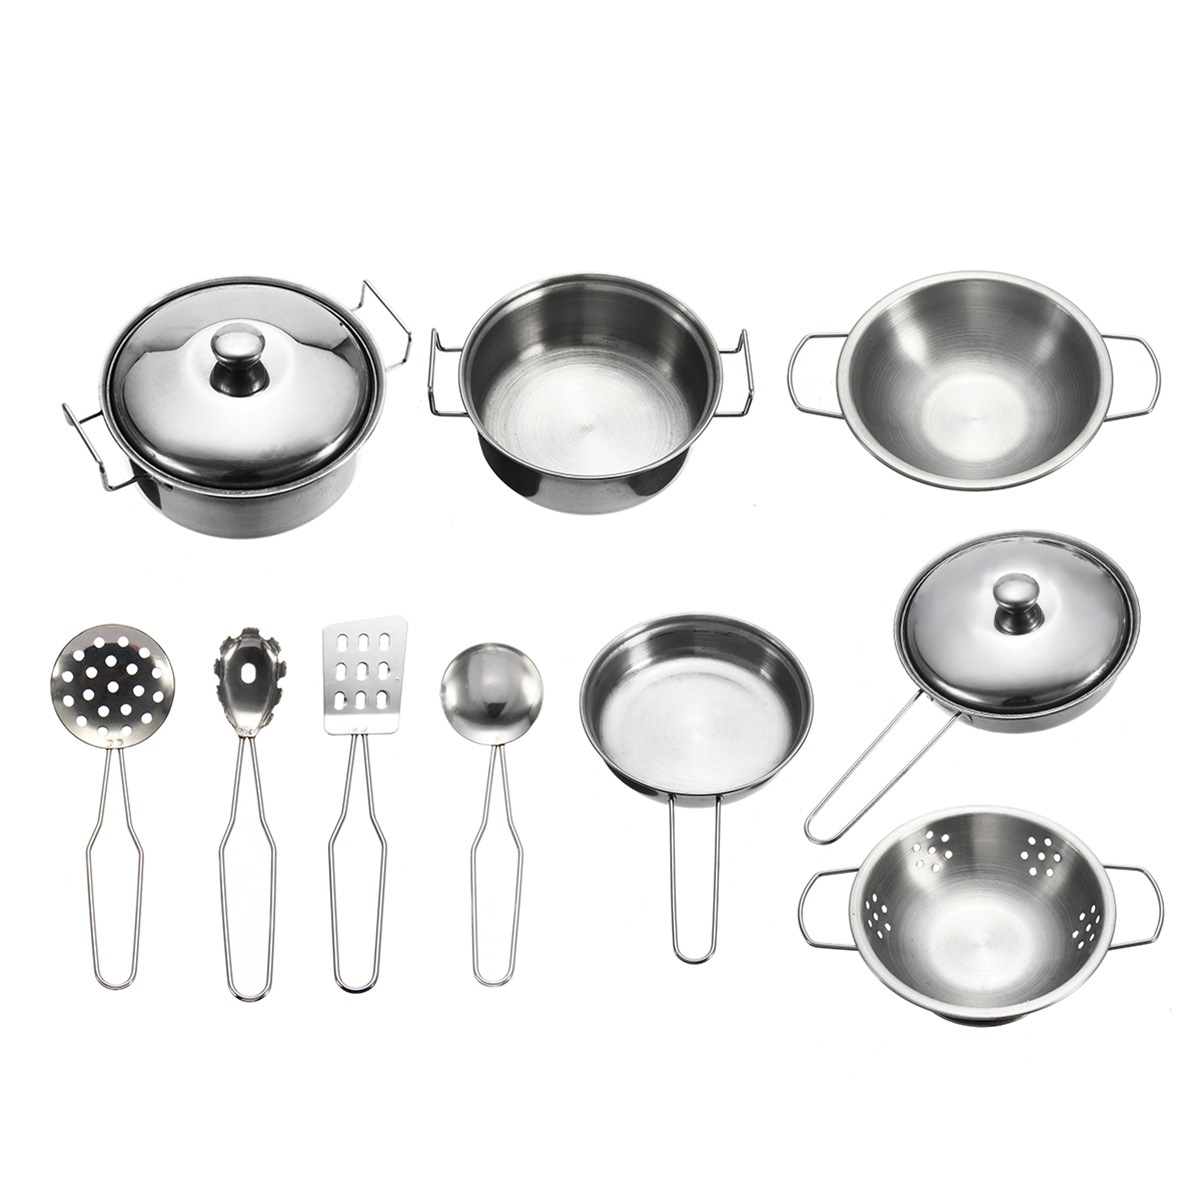 10pc-Stainless-steel-Cookware-Kitchen-Cooking-Set-Pot-Pans-House-Play-Toy-For-Children-1418086-2